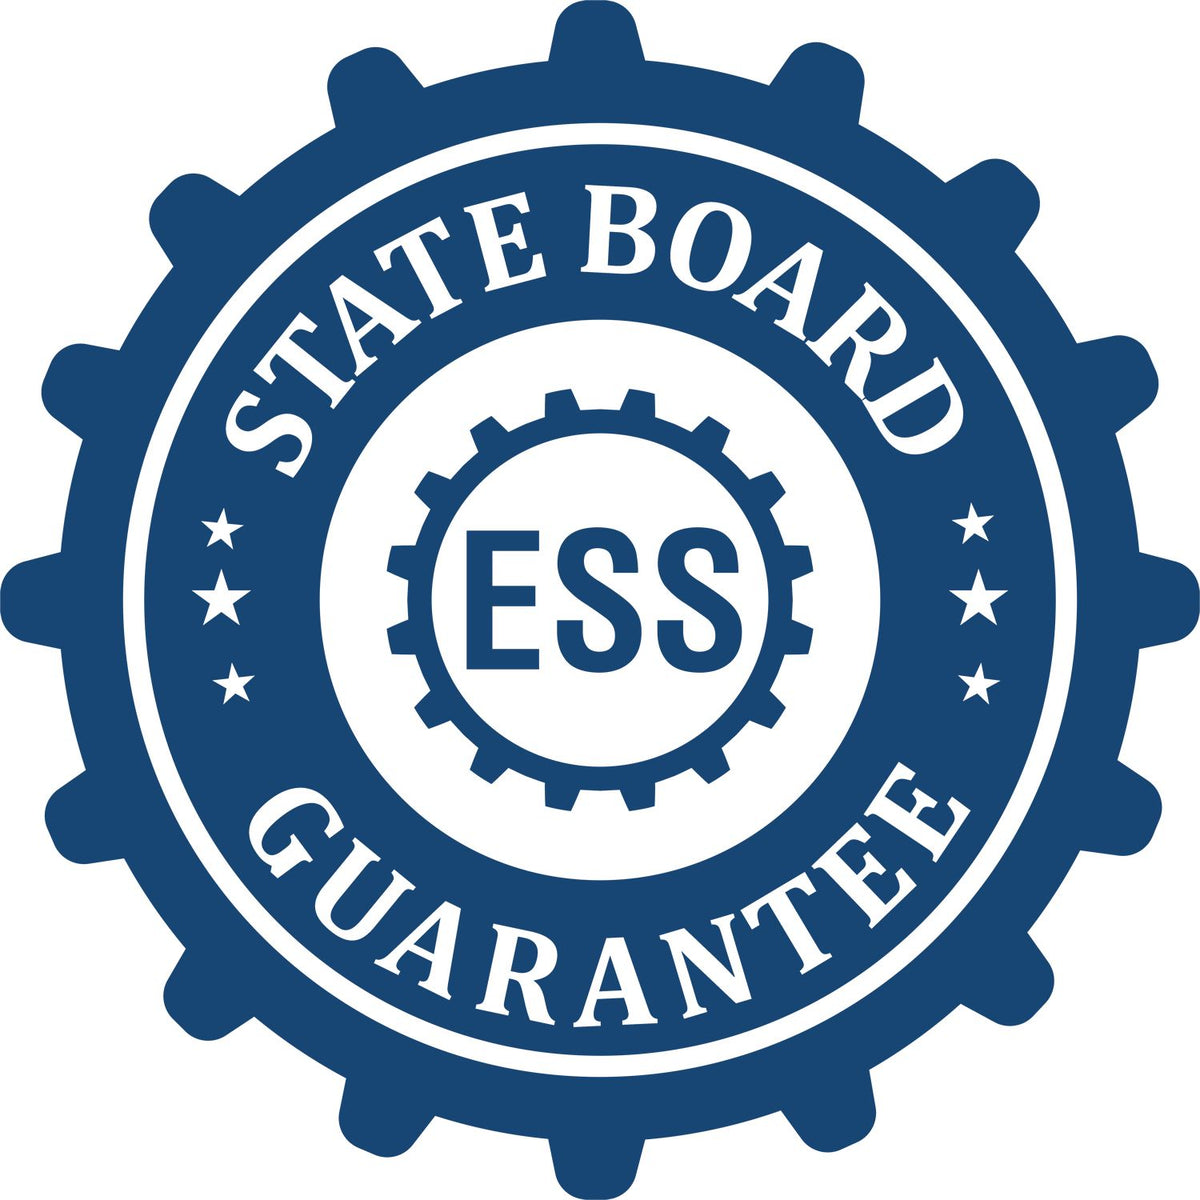 An emblem in a gear shape illustrating a state board guarantee for the Illinois Geologist Desk Seal